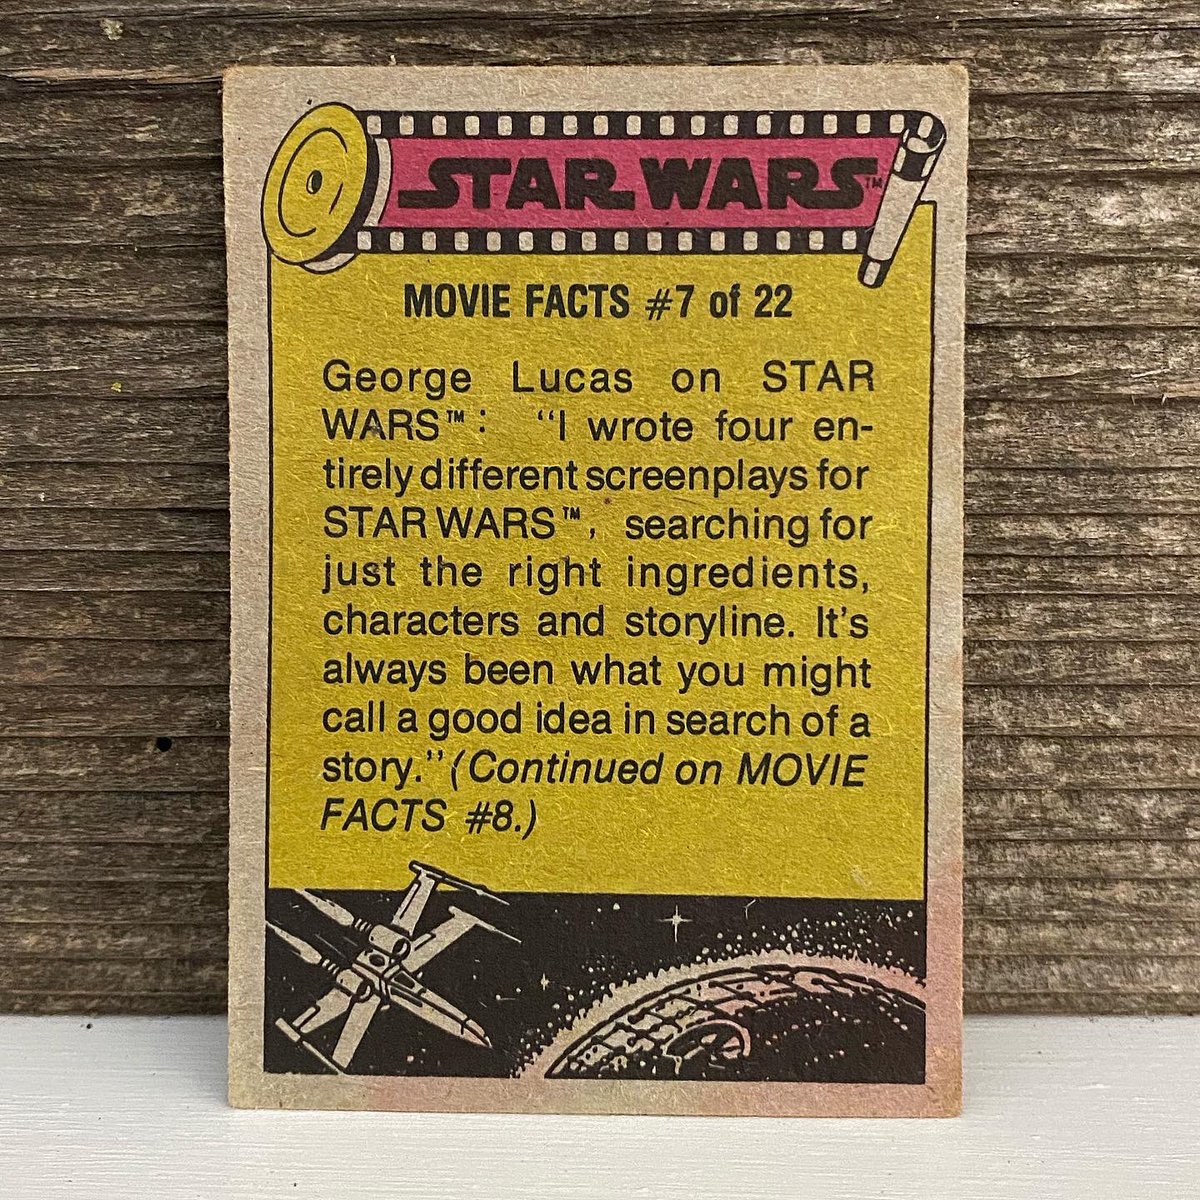 Topps Star Wars Series 4: #227 Instructing the Rebel pilots #collector #starwars #vintage #vintagestarwars #topps #tradingcards #rebels #moviefacts